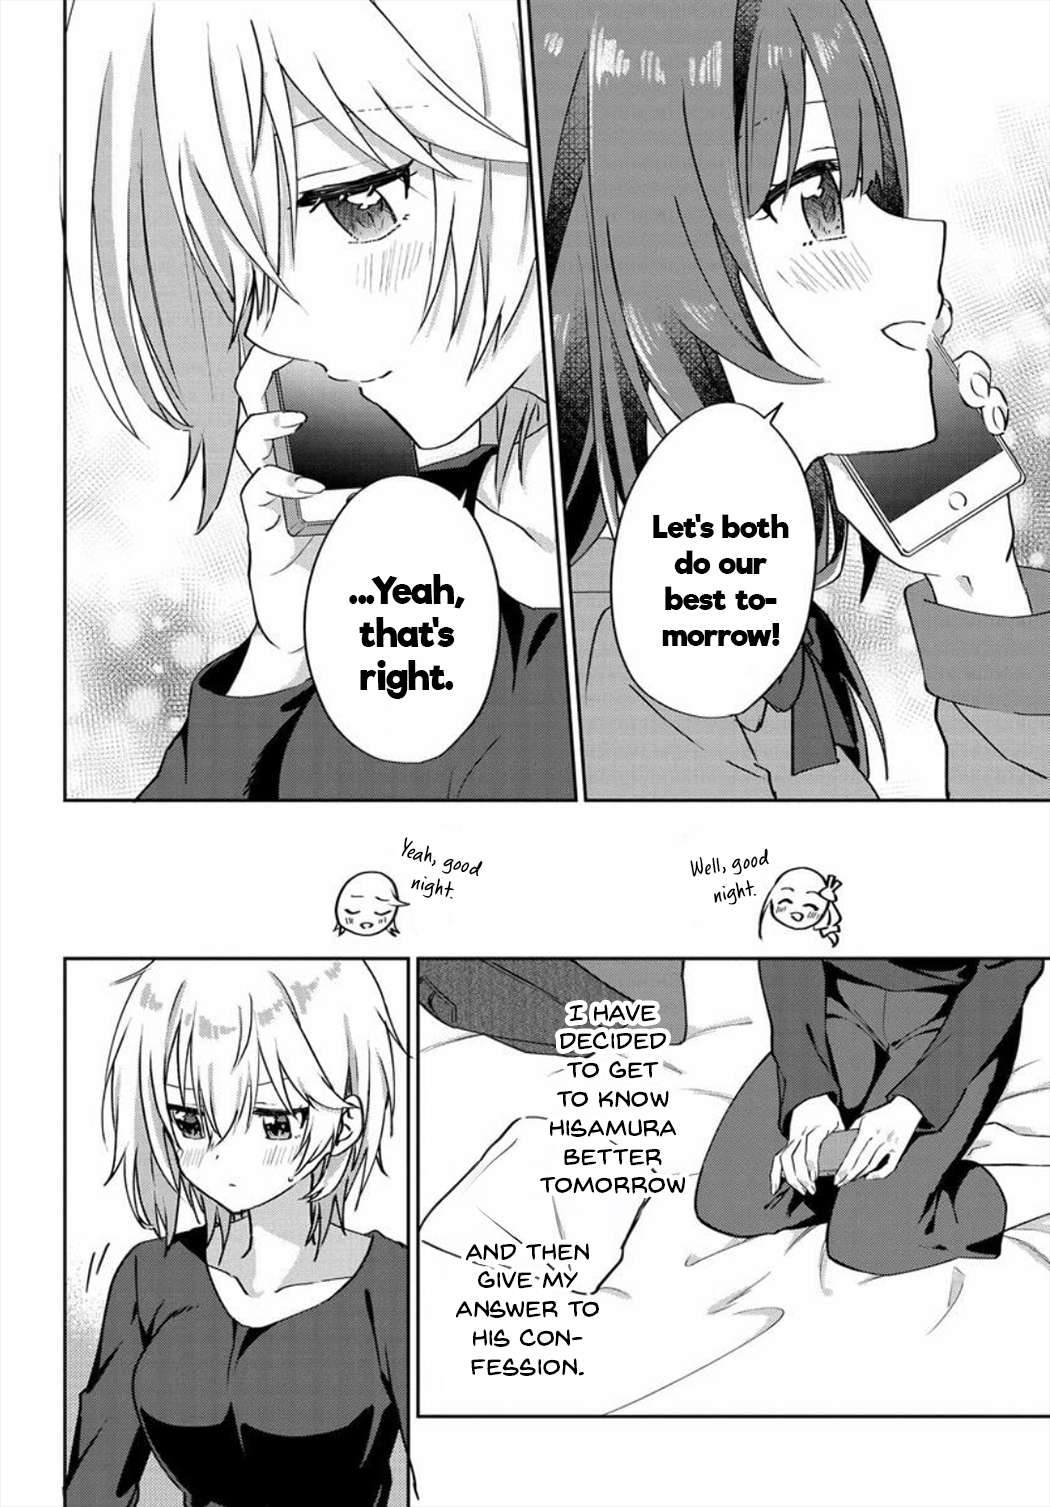 Since I’ve Entered the World of Romantic Comedy Manga, I’ll Do My Best to Make the Losing Heroine Happy. - chapter 6.6 - #6